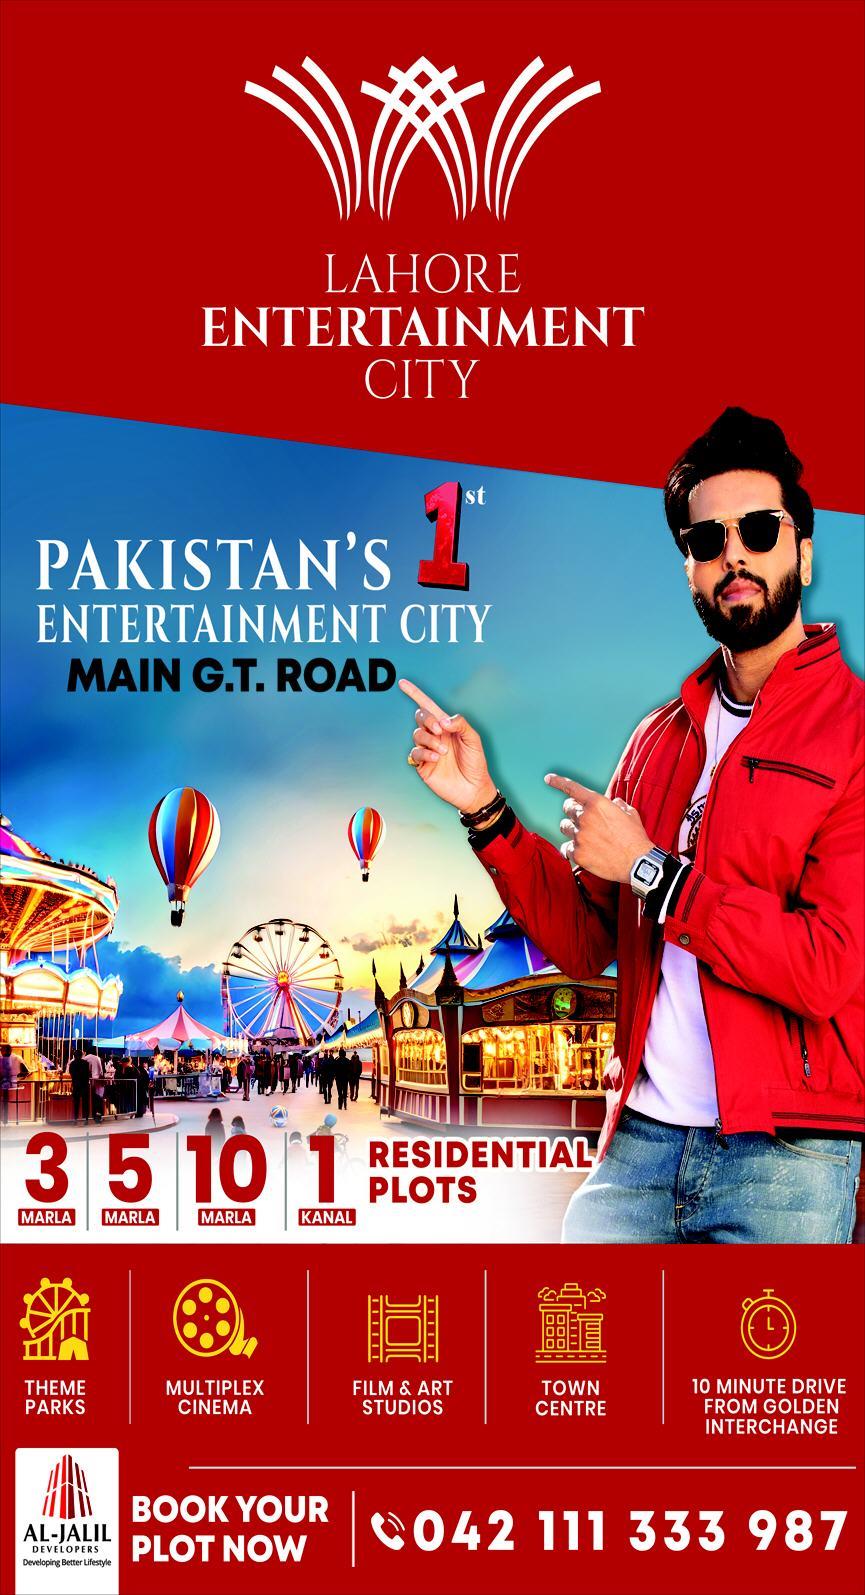 Lahore Entertainment City Main G.T Road Residential Plots 3 5 10 Marla 1 Kanal Payment Detail